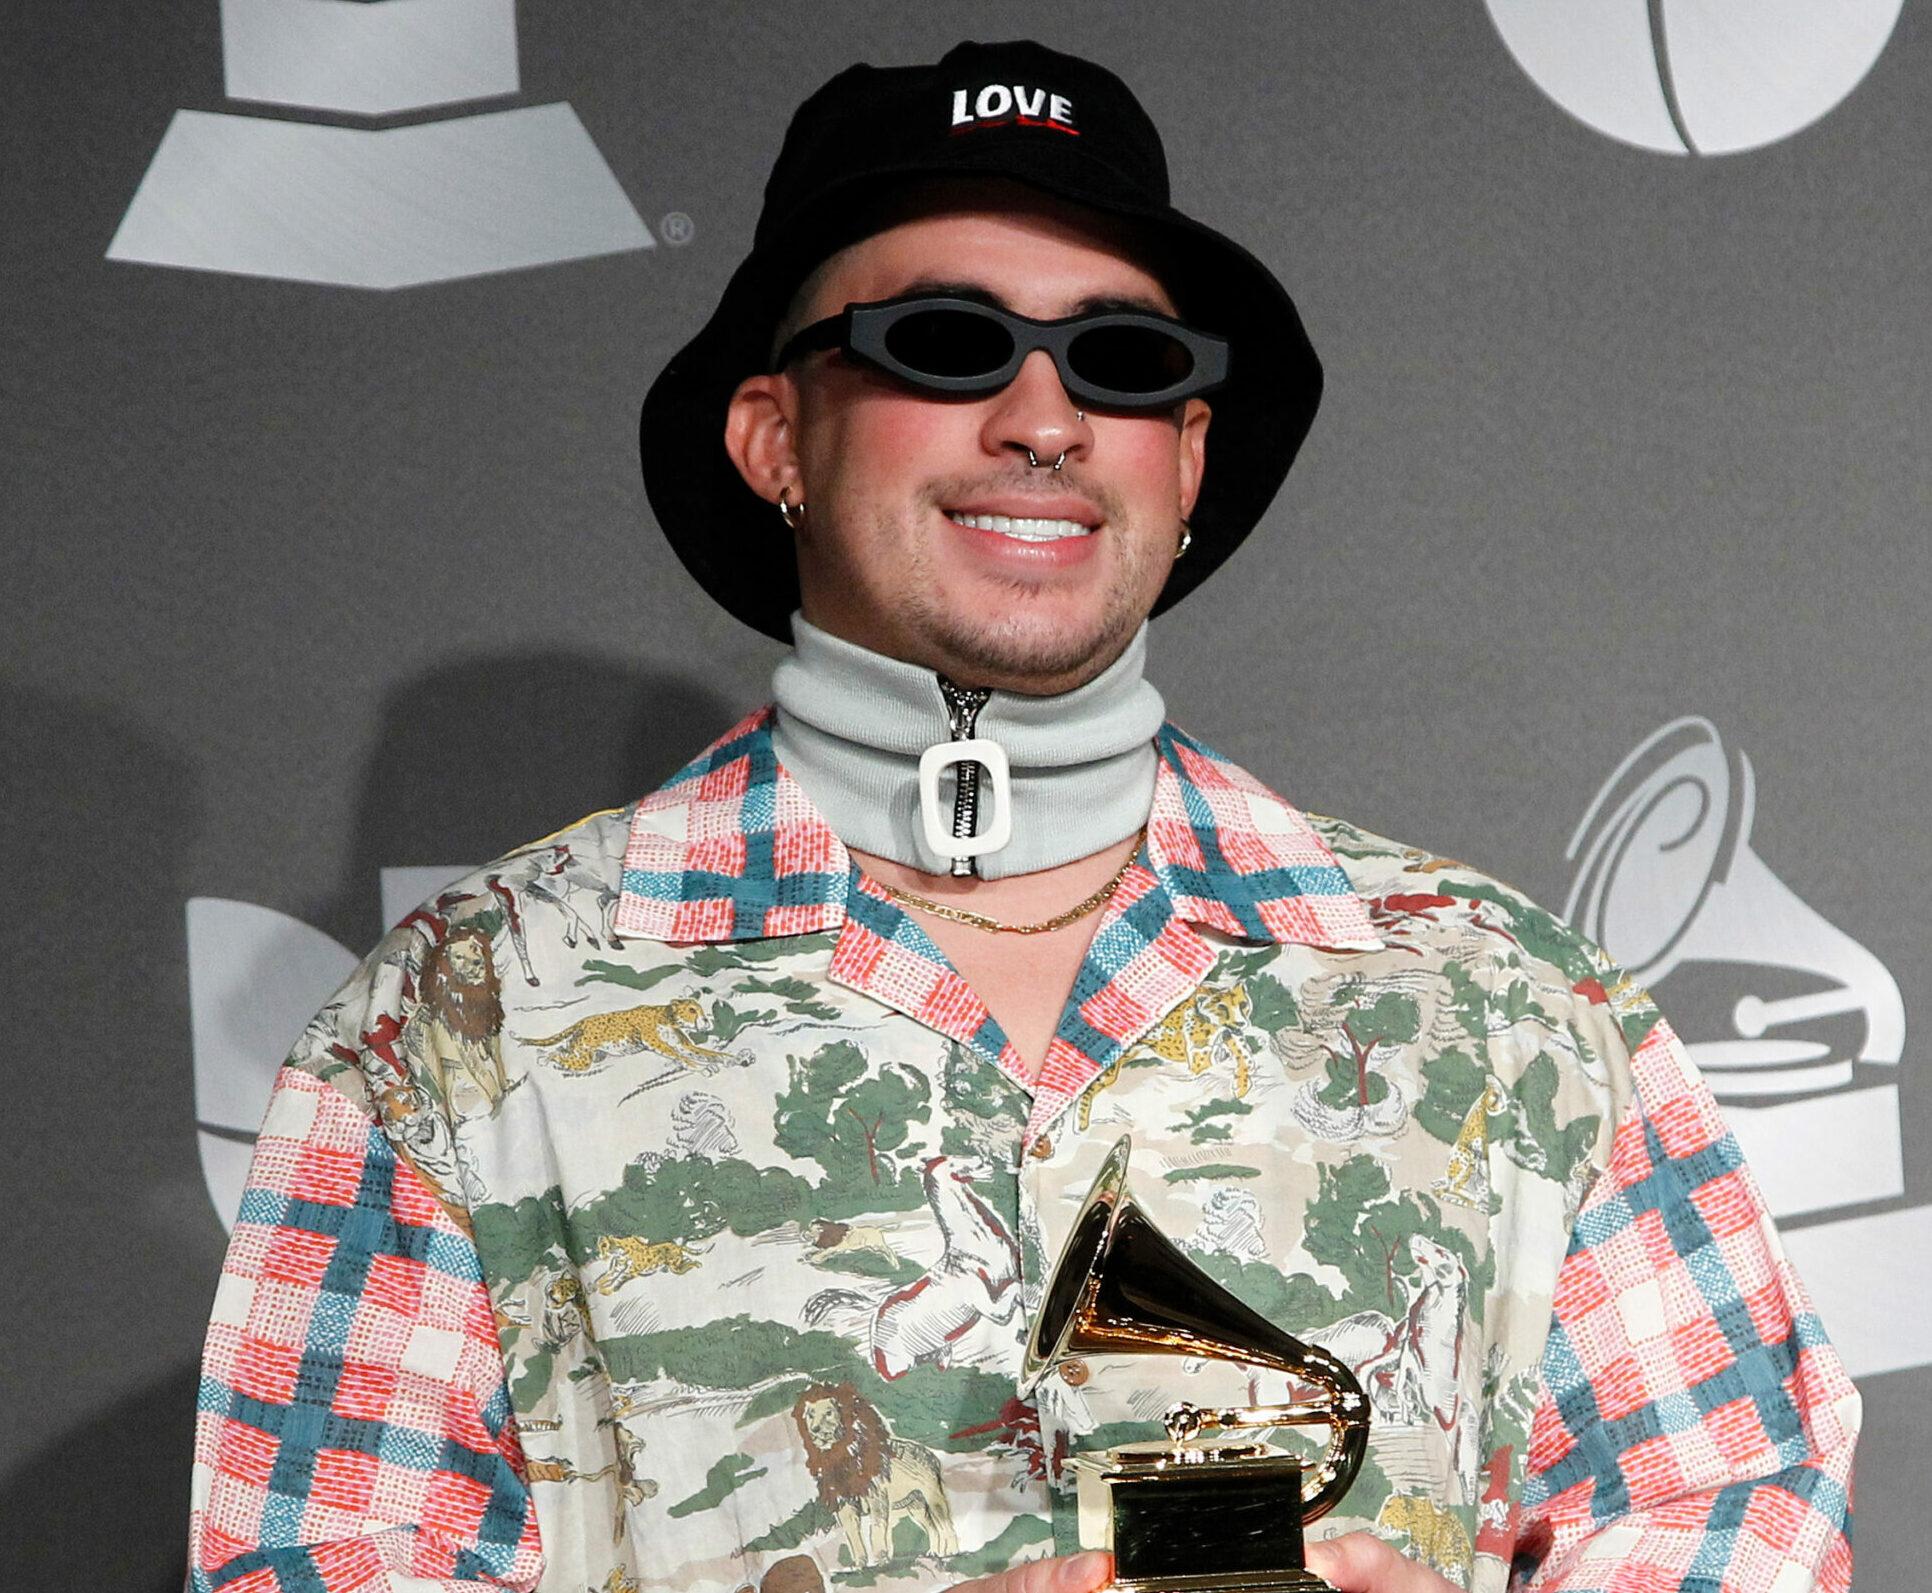 Bad Bunny at the 20th Annual Latin GRAMMY Awards held at the MGM Grand Garden Arena on November 14, 2019 in Las Vegas, NV.